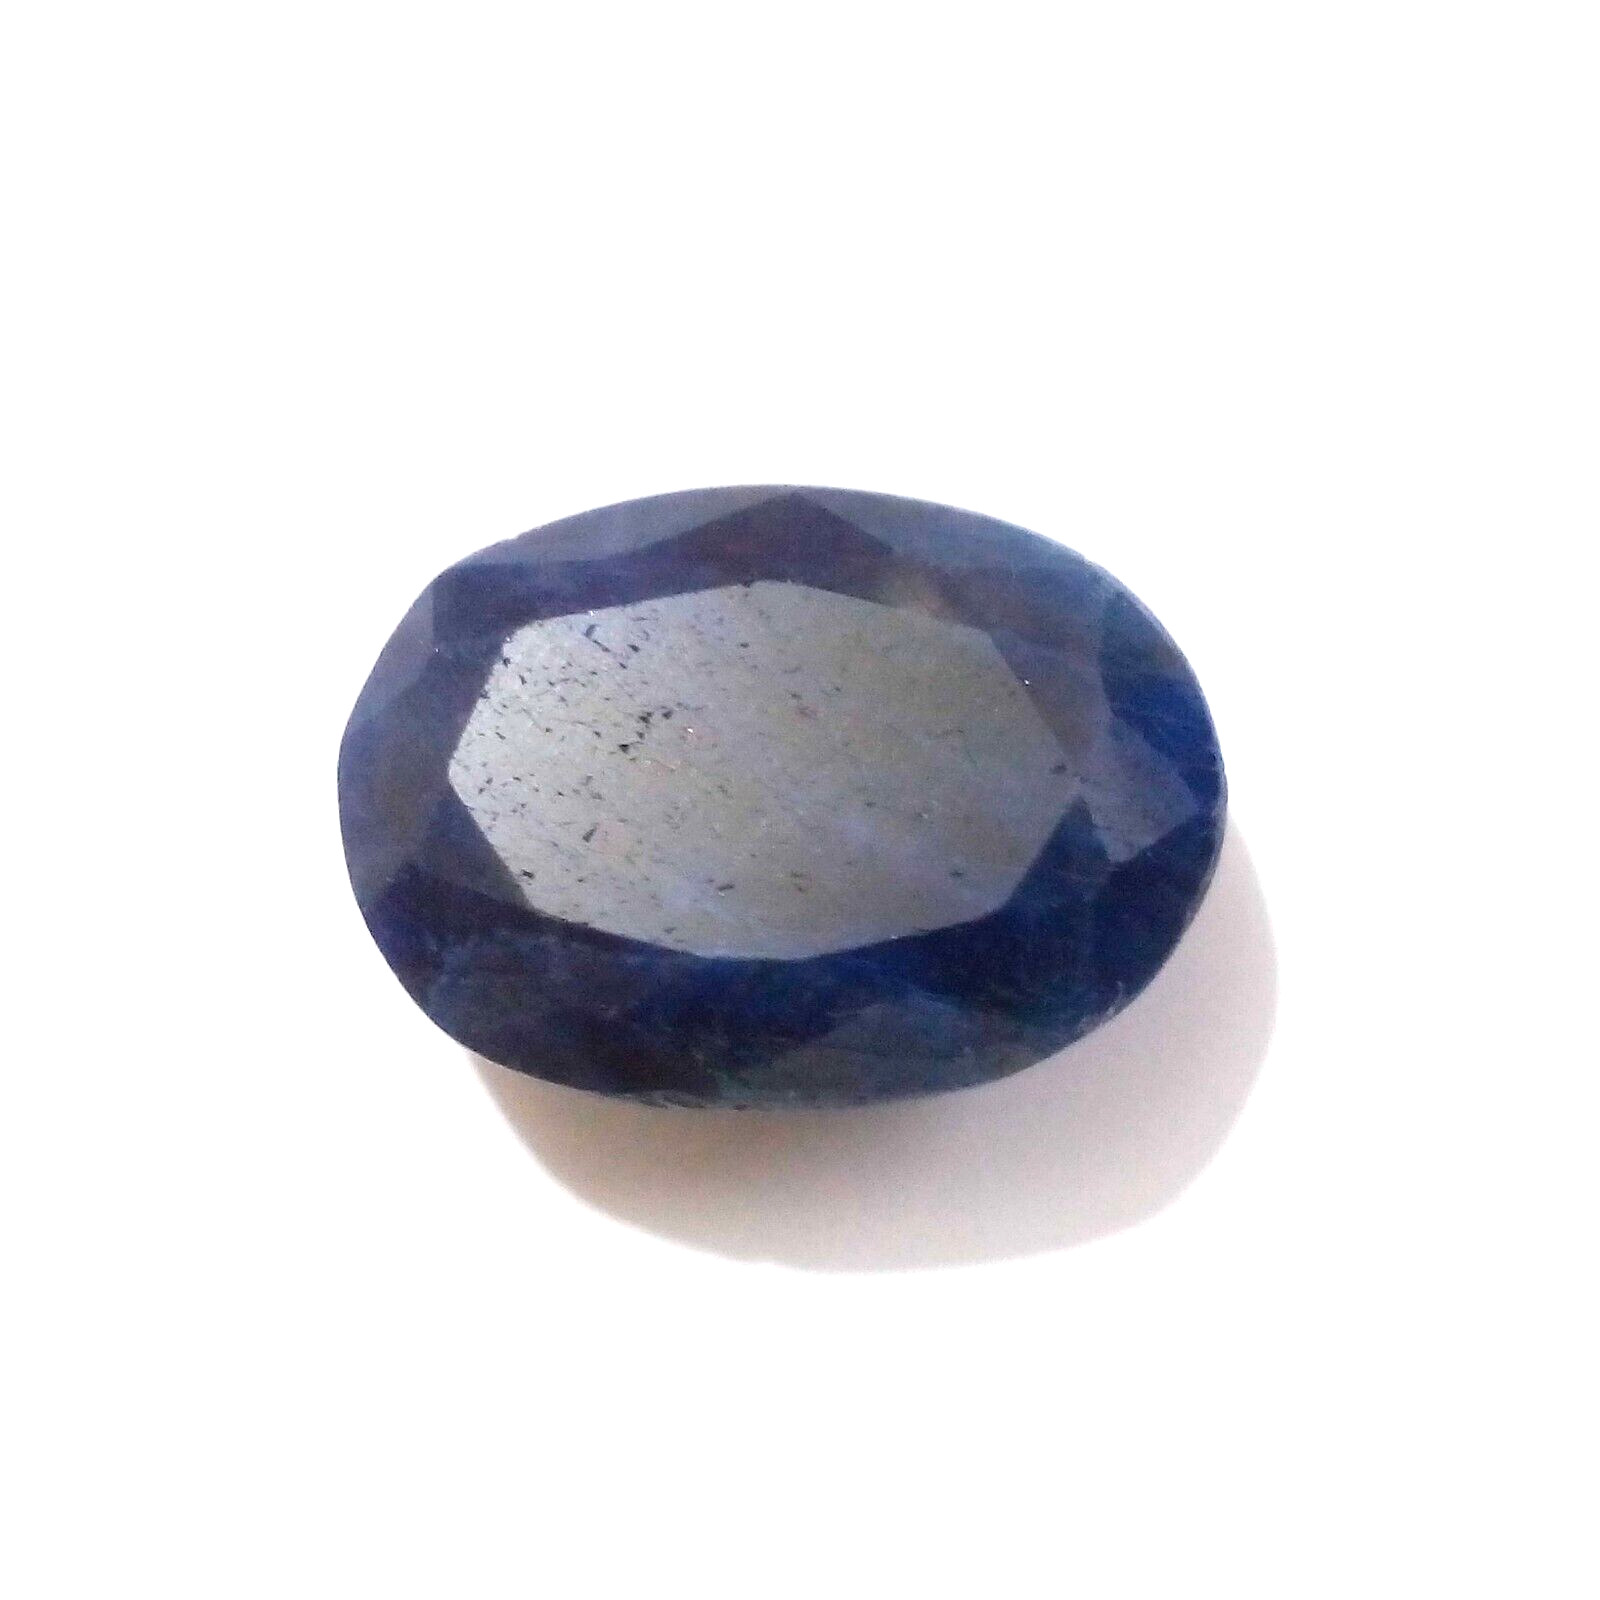 Attractive Madagascar Blue Sapphire Faceted Oval Shape 11.21 Crt Loose Gemstone